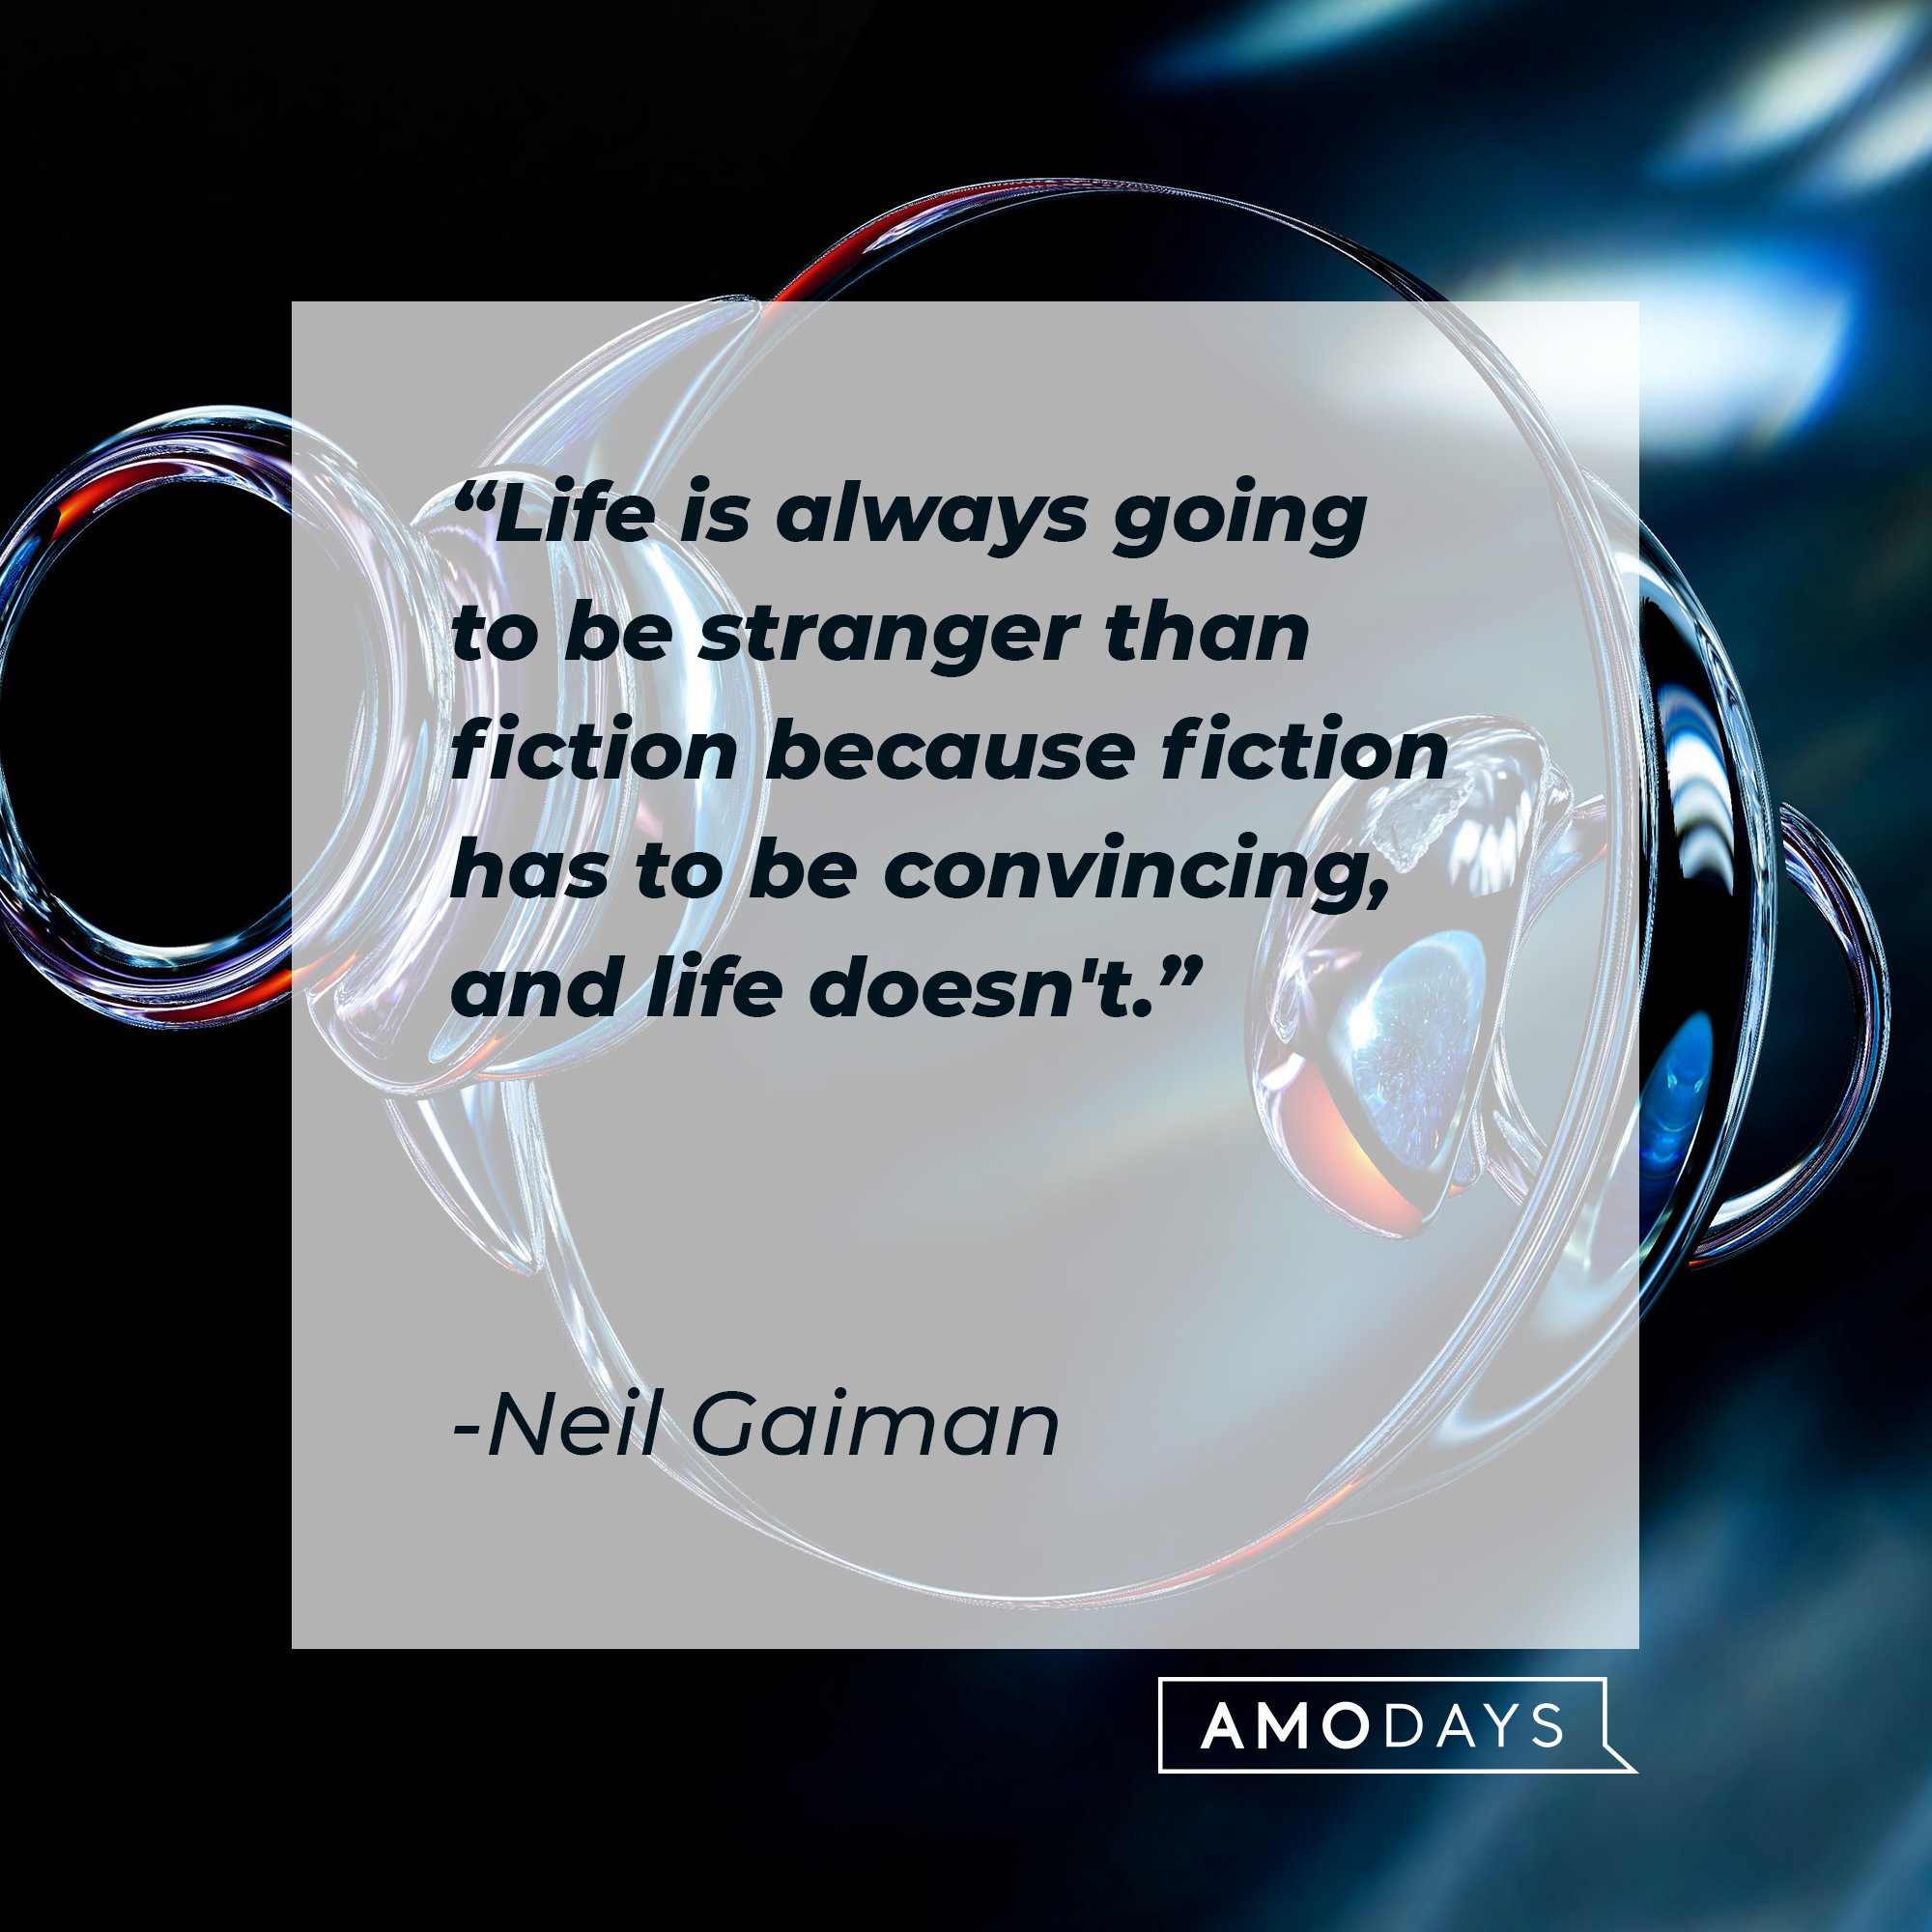  Neil Gaiman's quote: "Life is always going to be stranger than fiction because fiction has to be convincing, and life doesn't." | Image: AmoDays